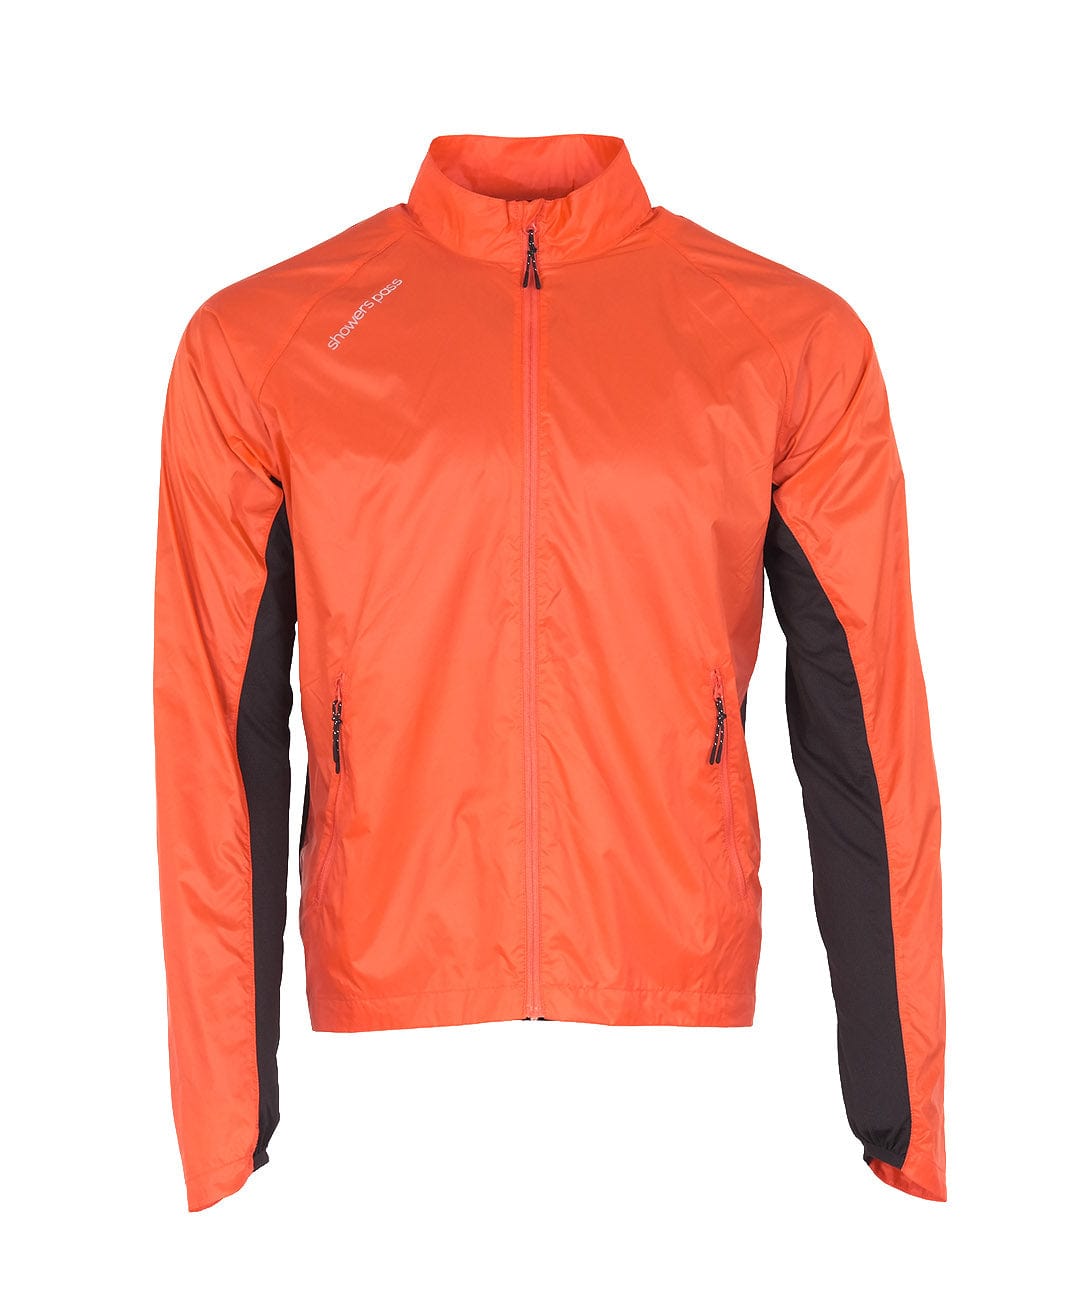 Ultralight Wind Jacket Red Orange / X-Large by Showers Pass